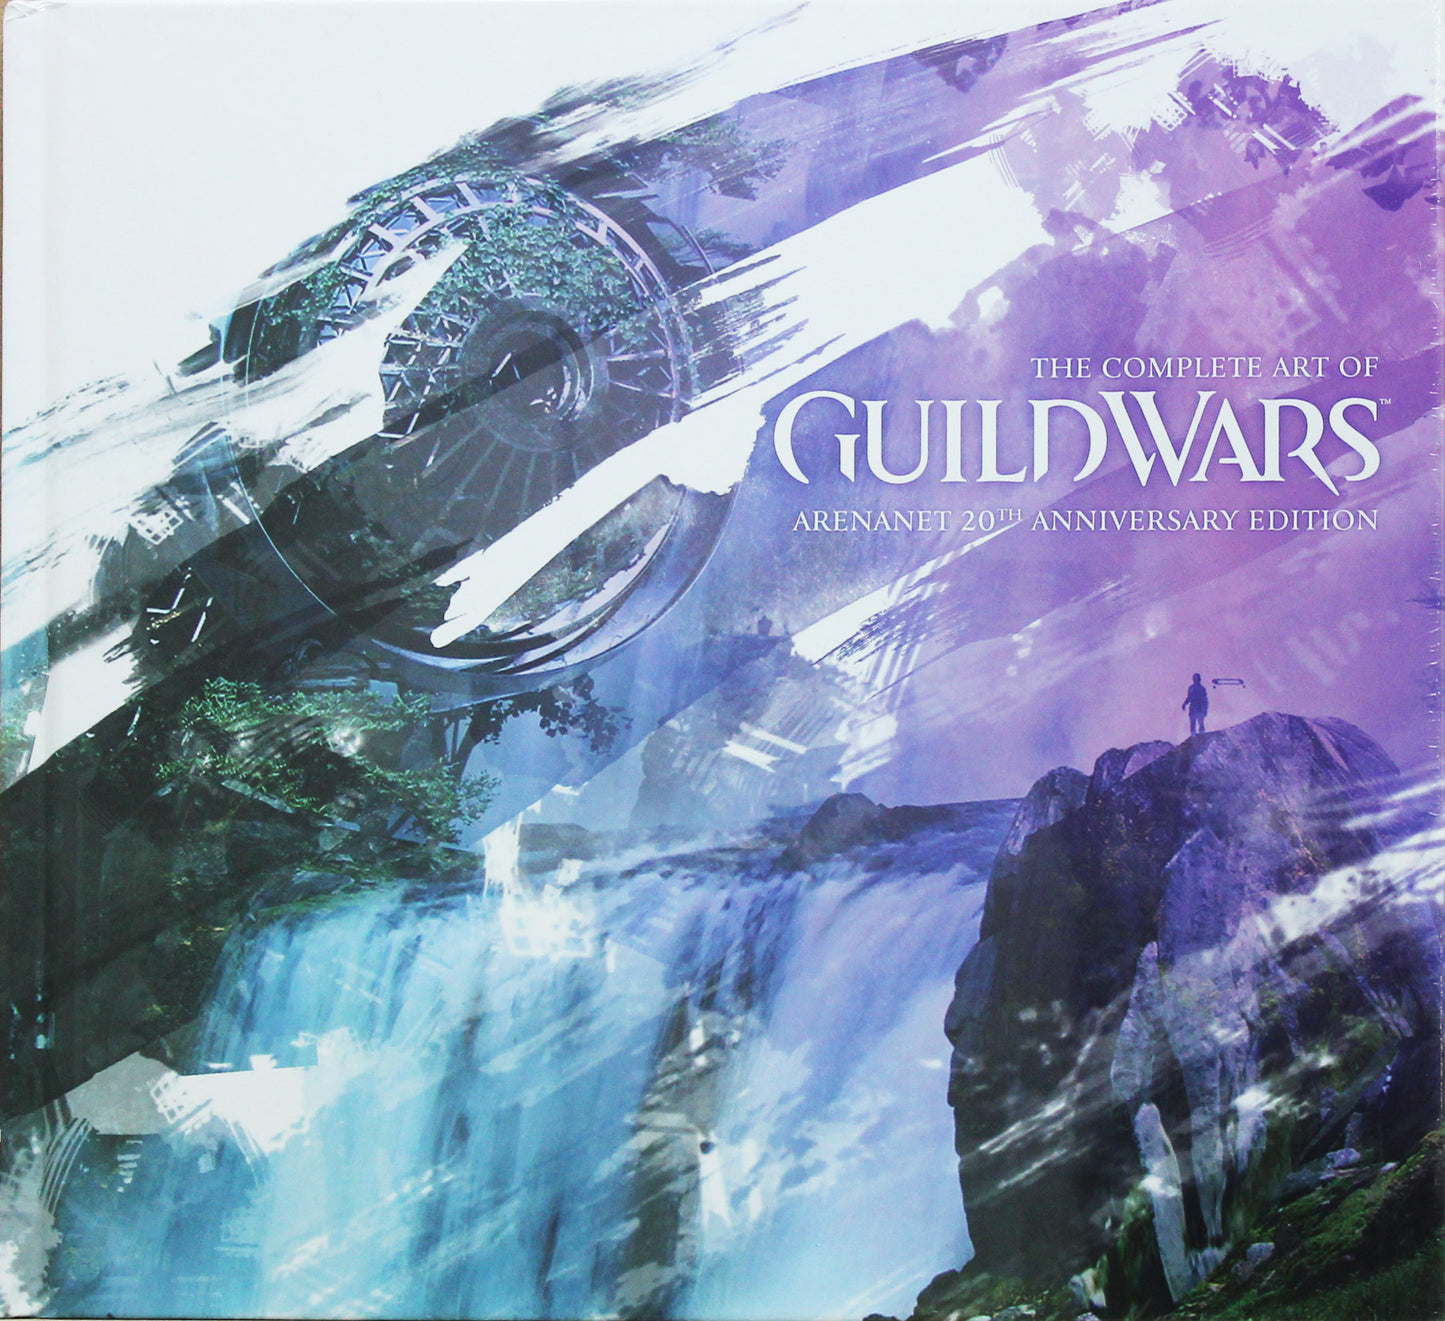 The Complete Art of Guildwars